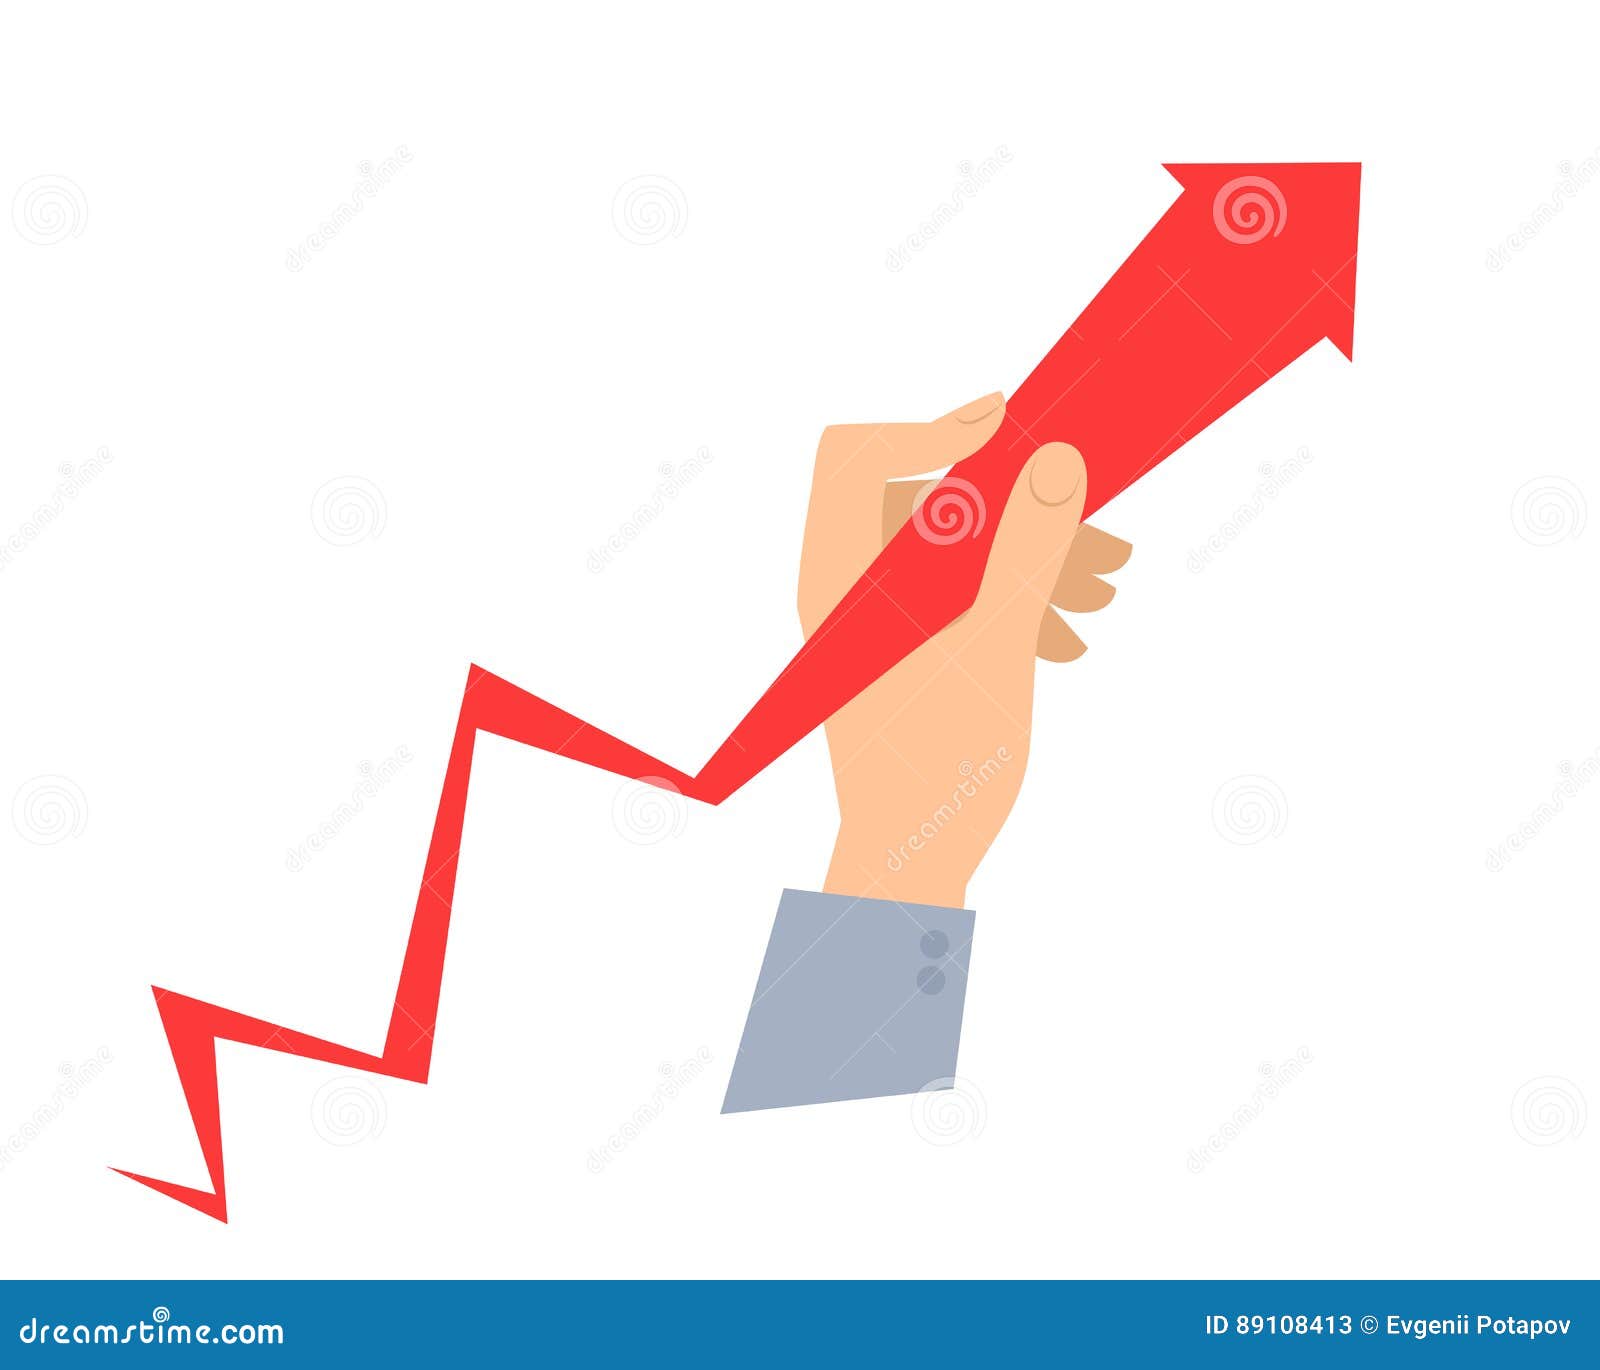 hand holds arrow graph and pulls it to improve business.